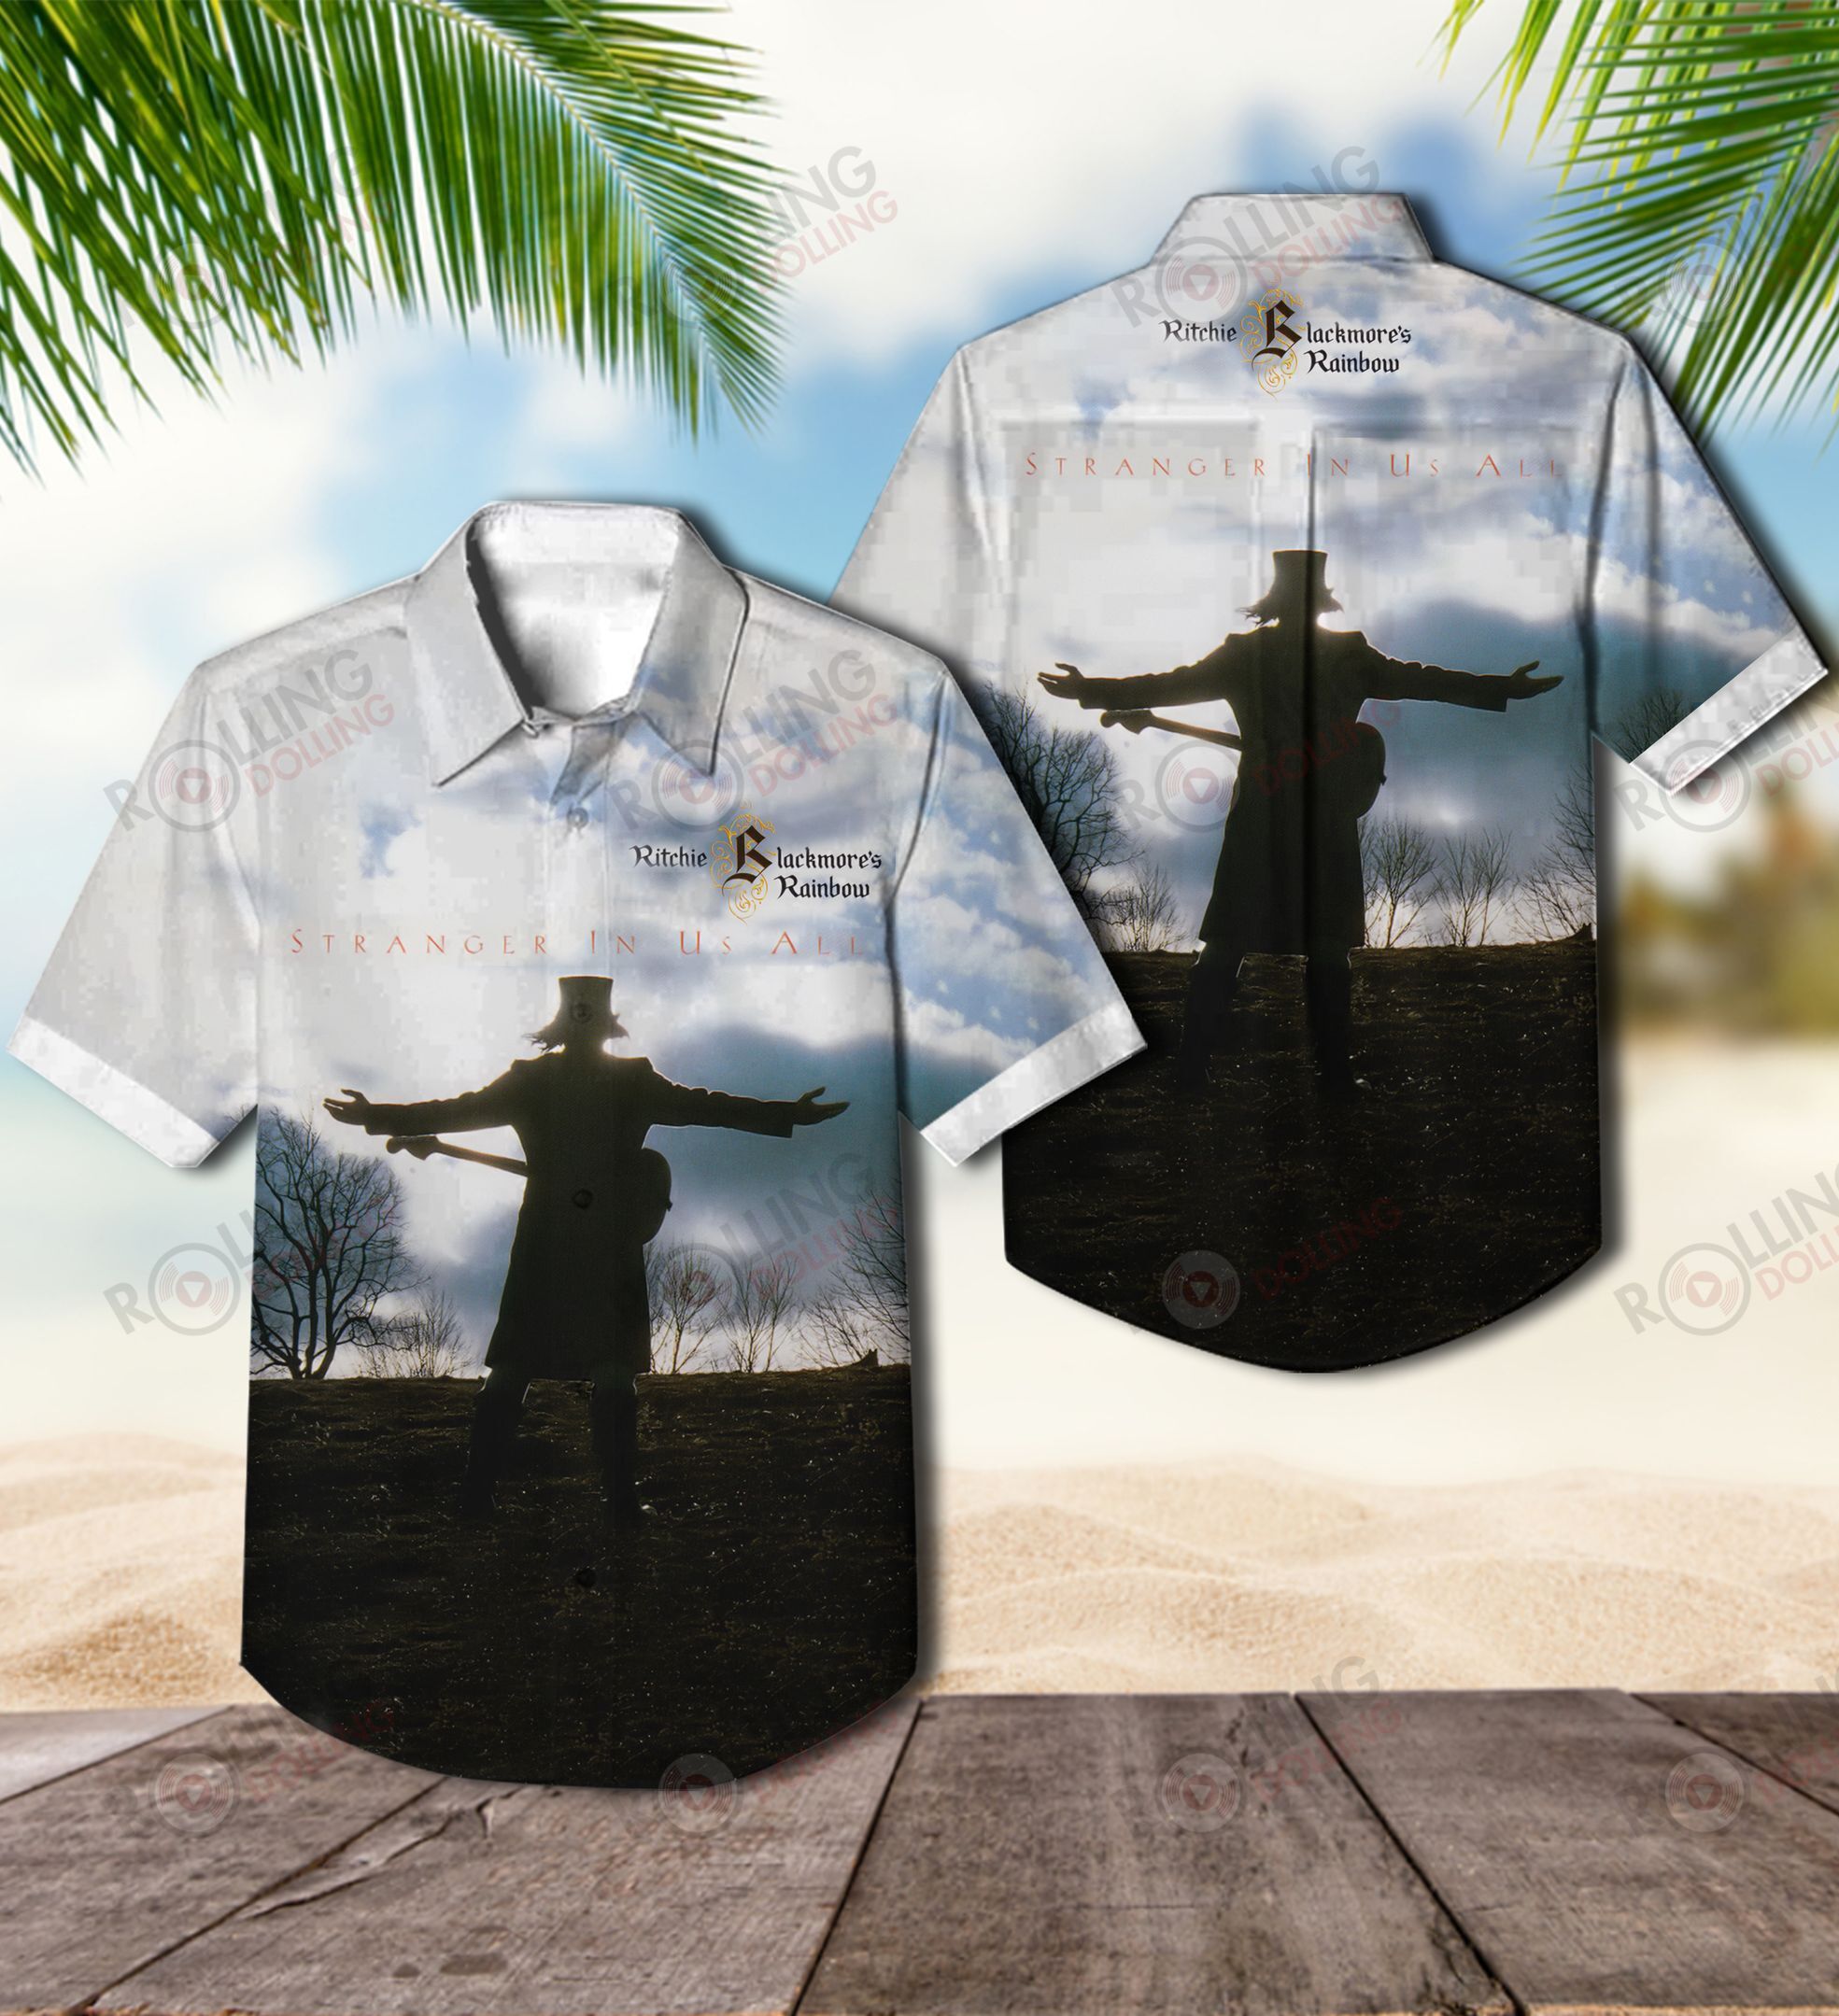 Now you can show off your love of all things band with this Hawaiian Shirt 39